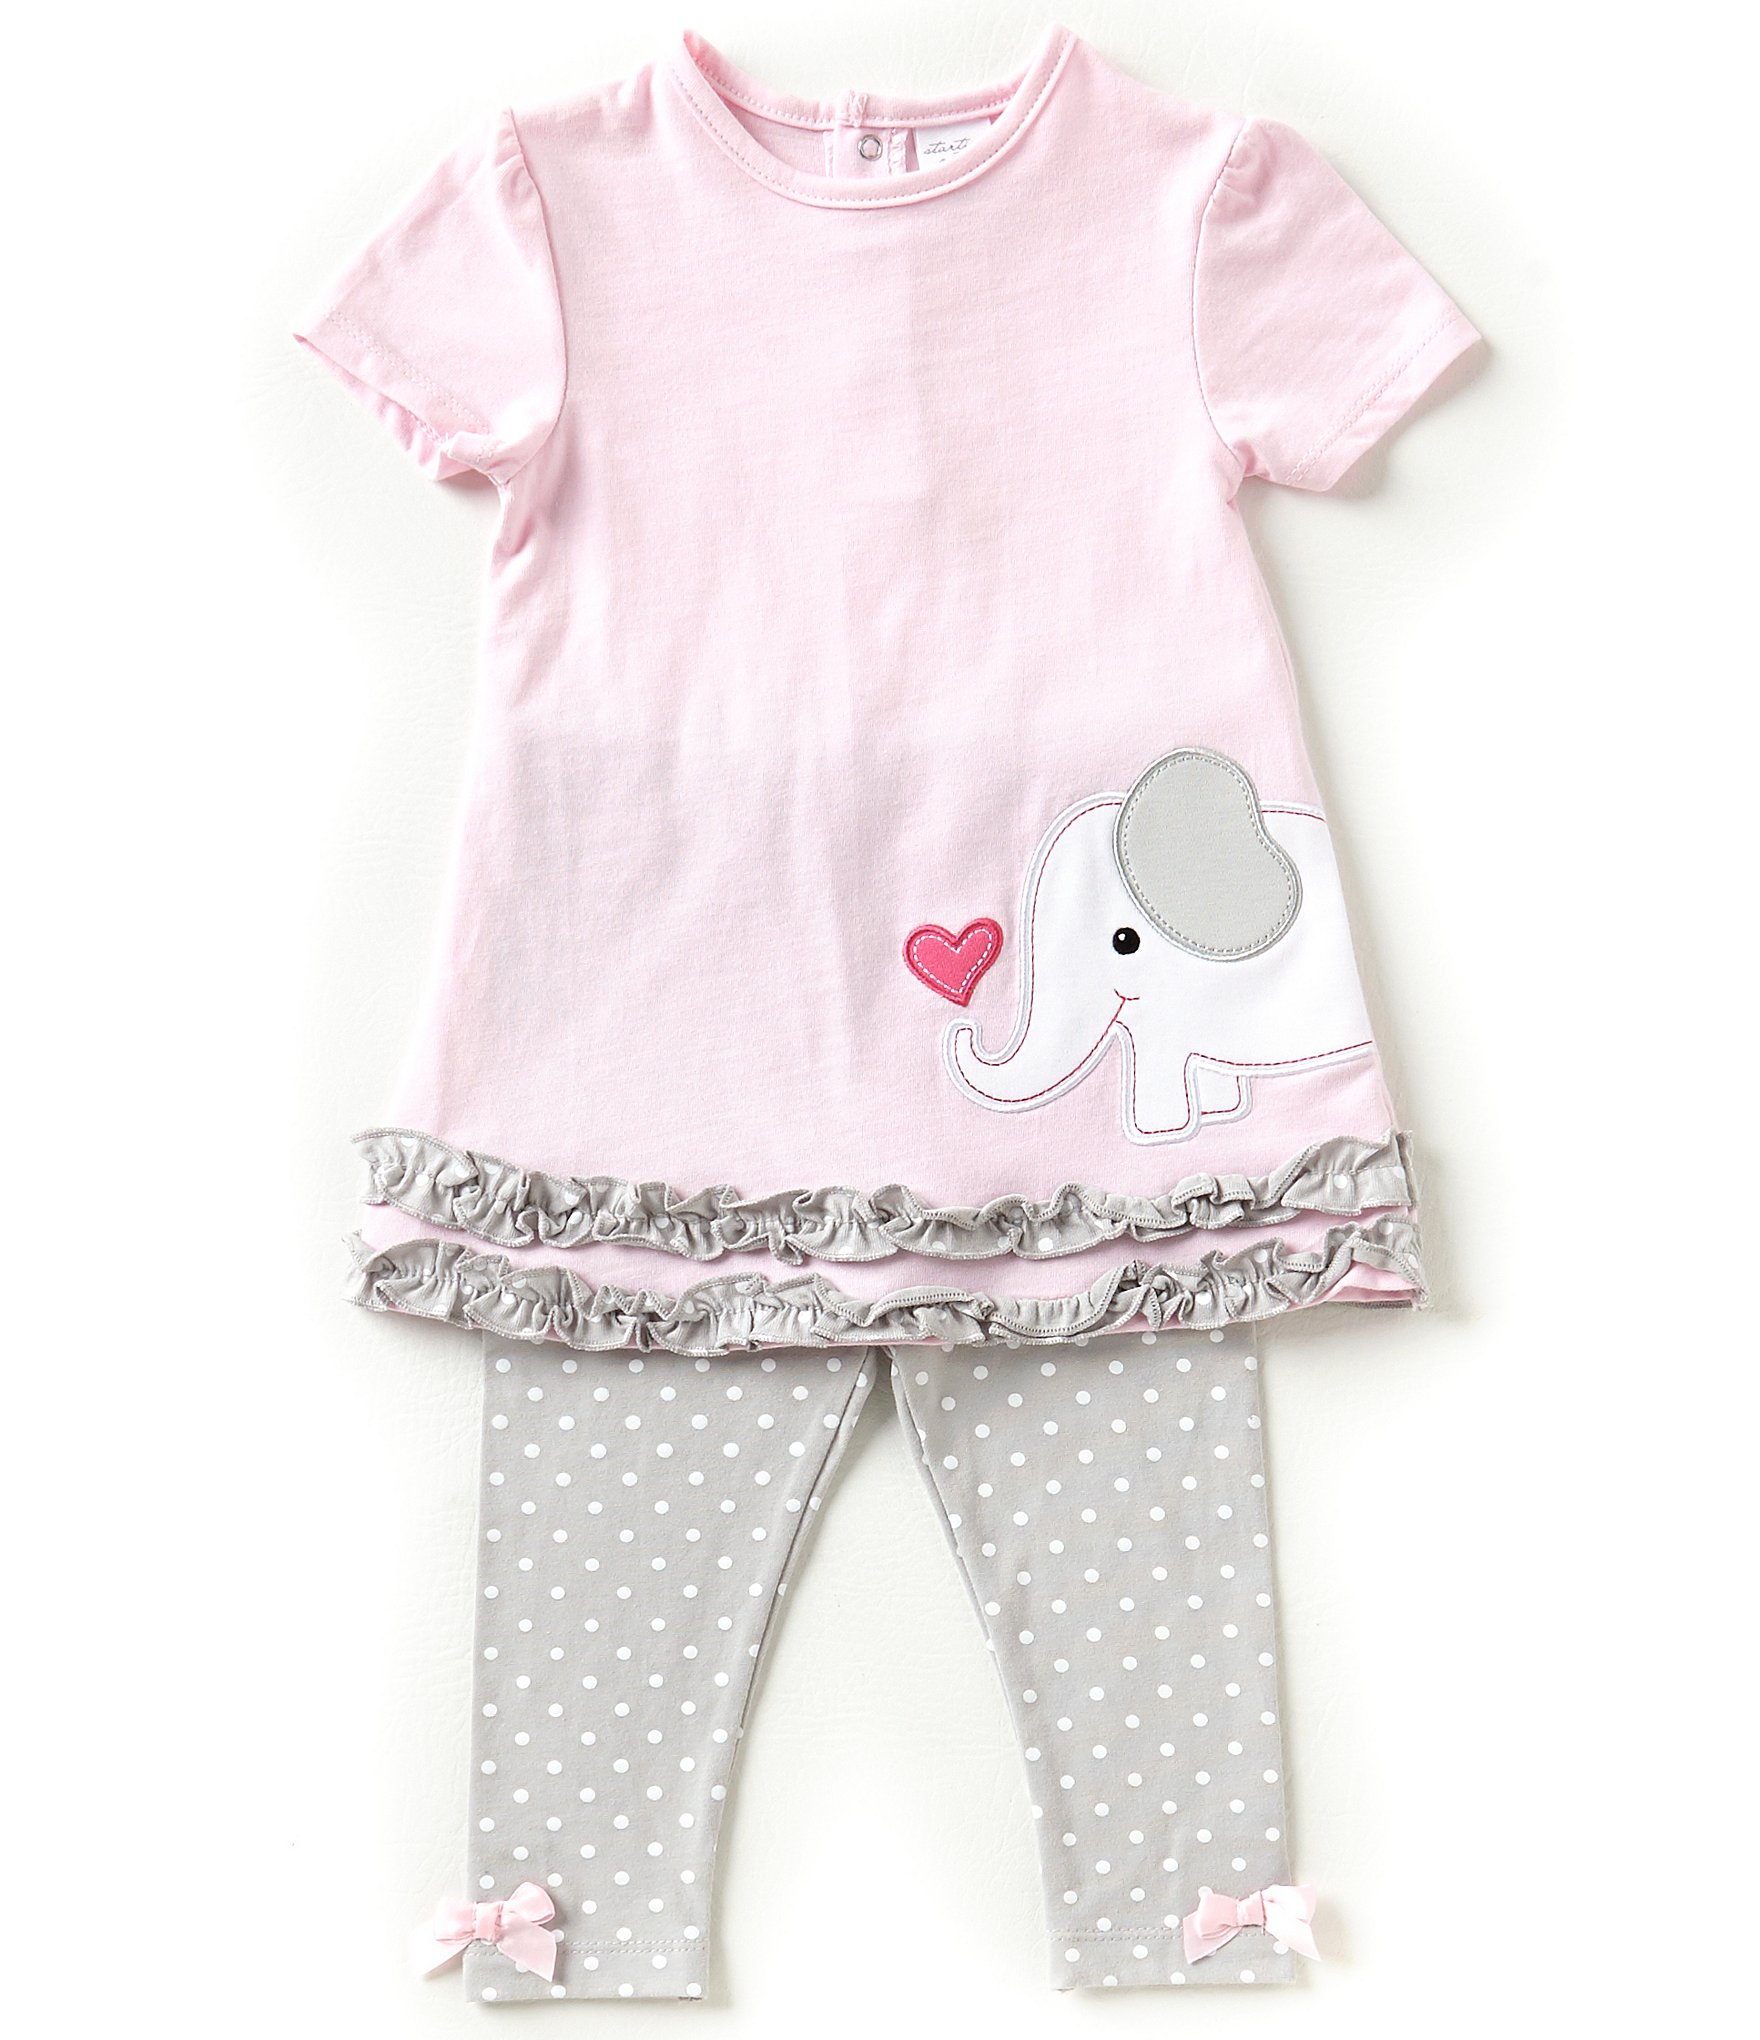 Find the best baby girl clothing for your little one